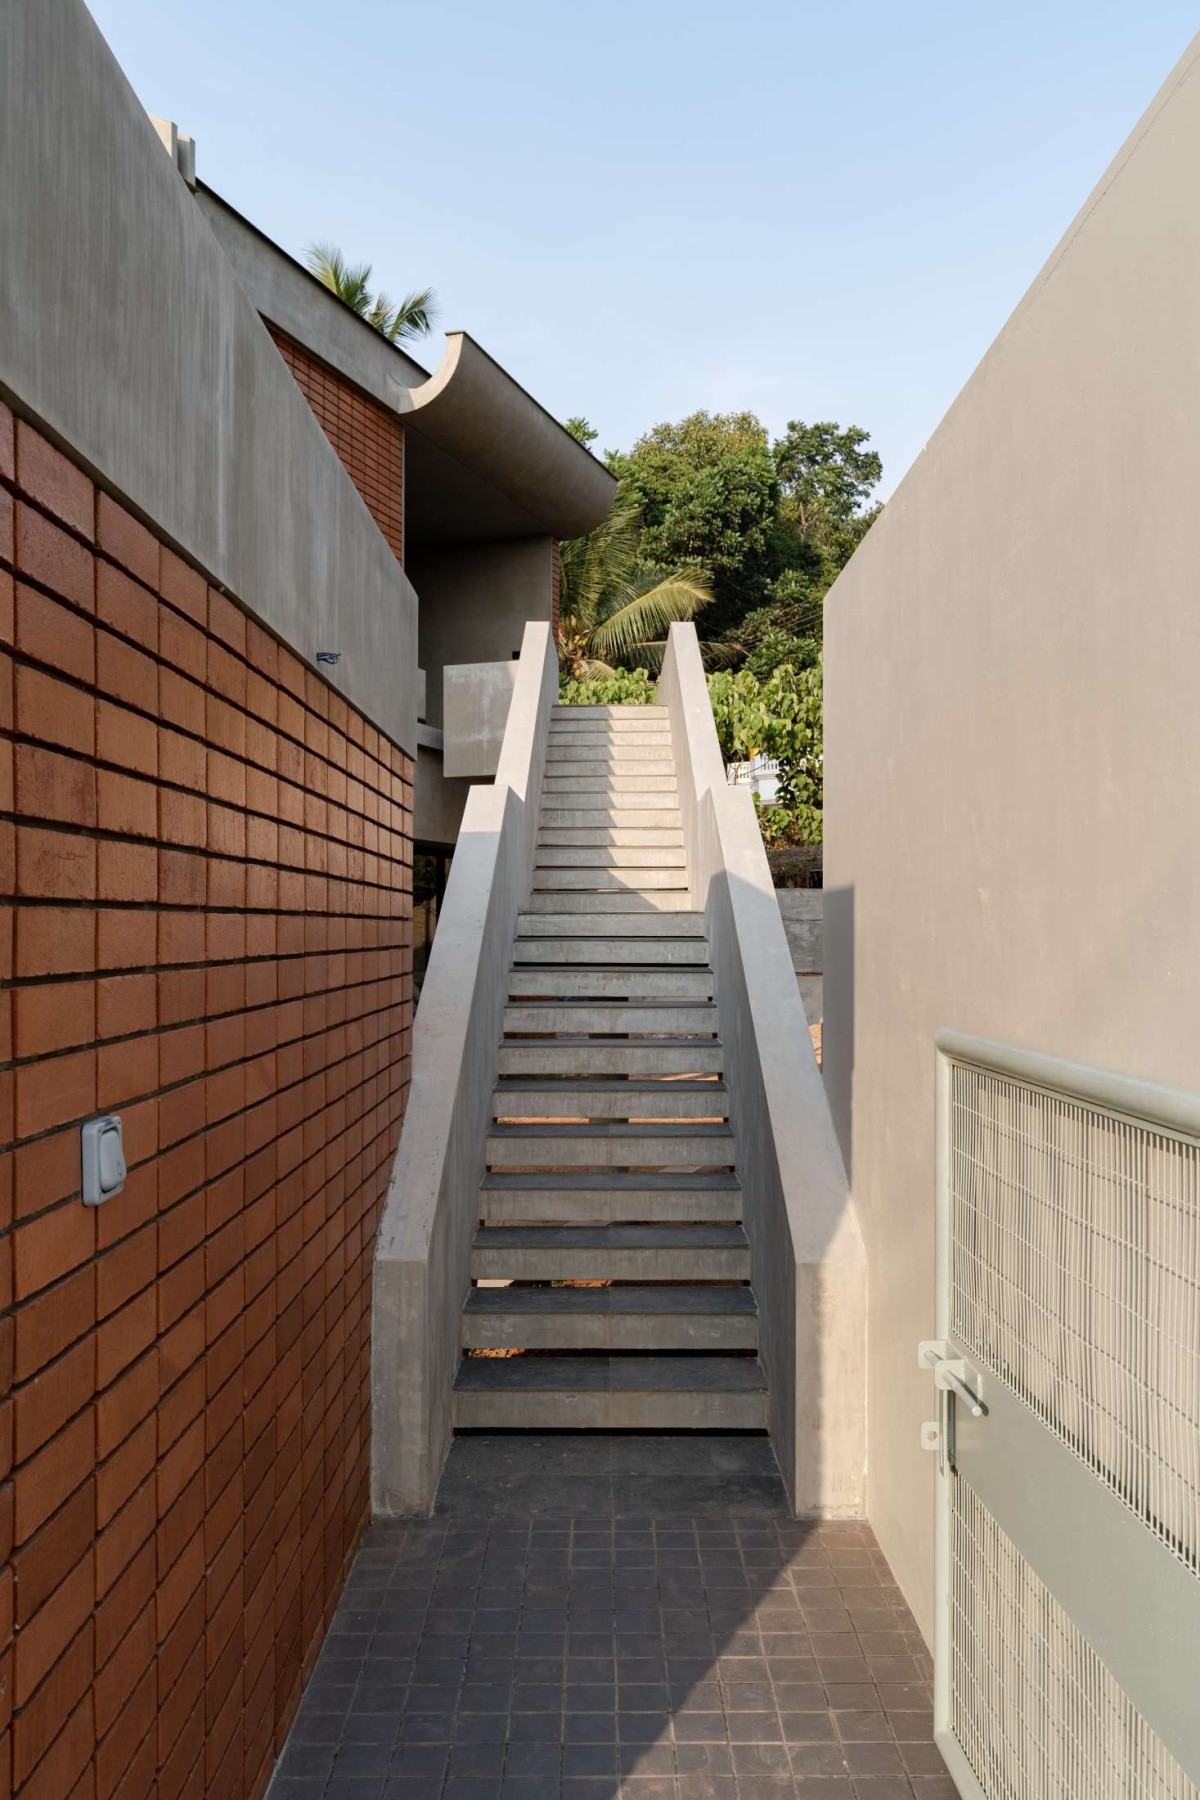 External staircase of Artist Residence & Atelier by Cochin Creative Collective